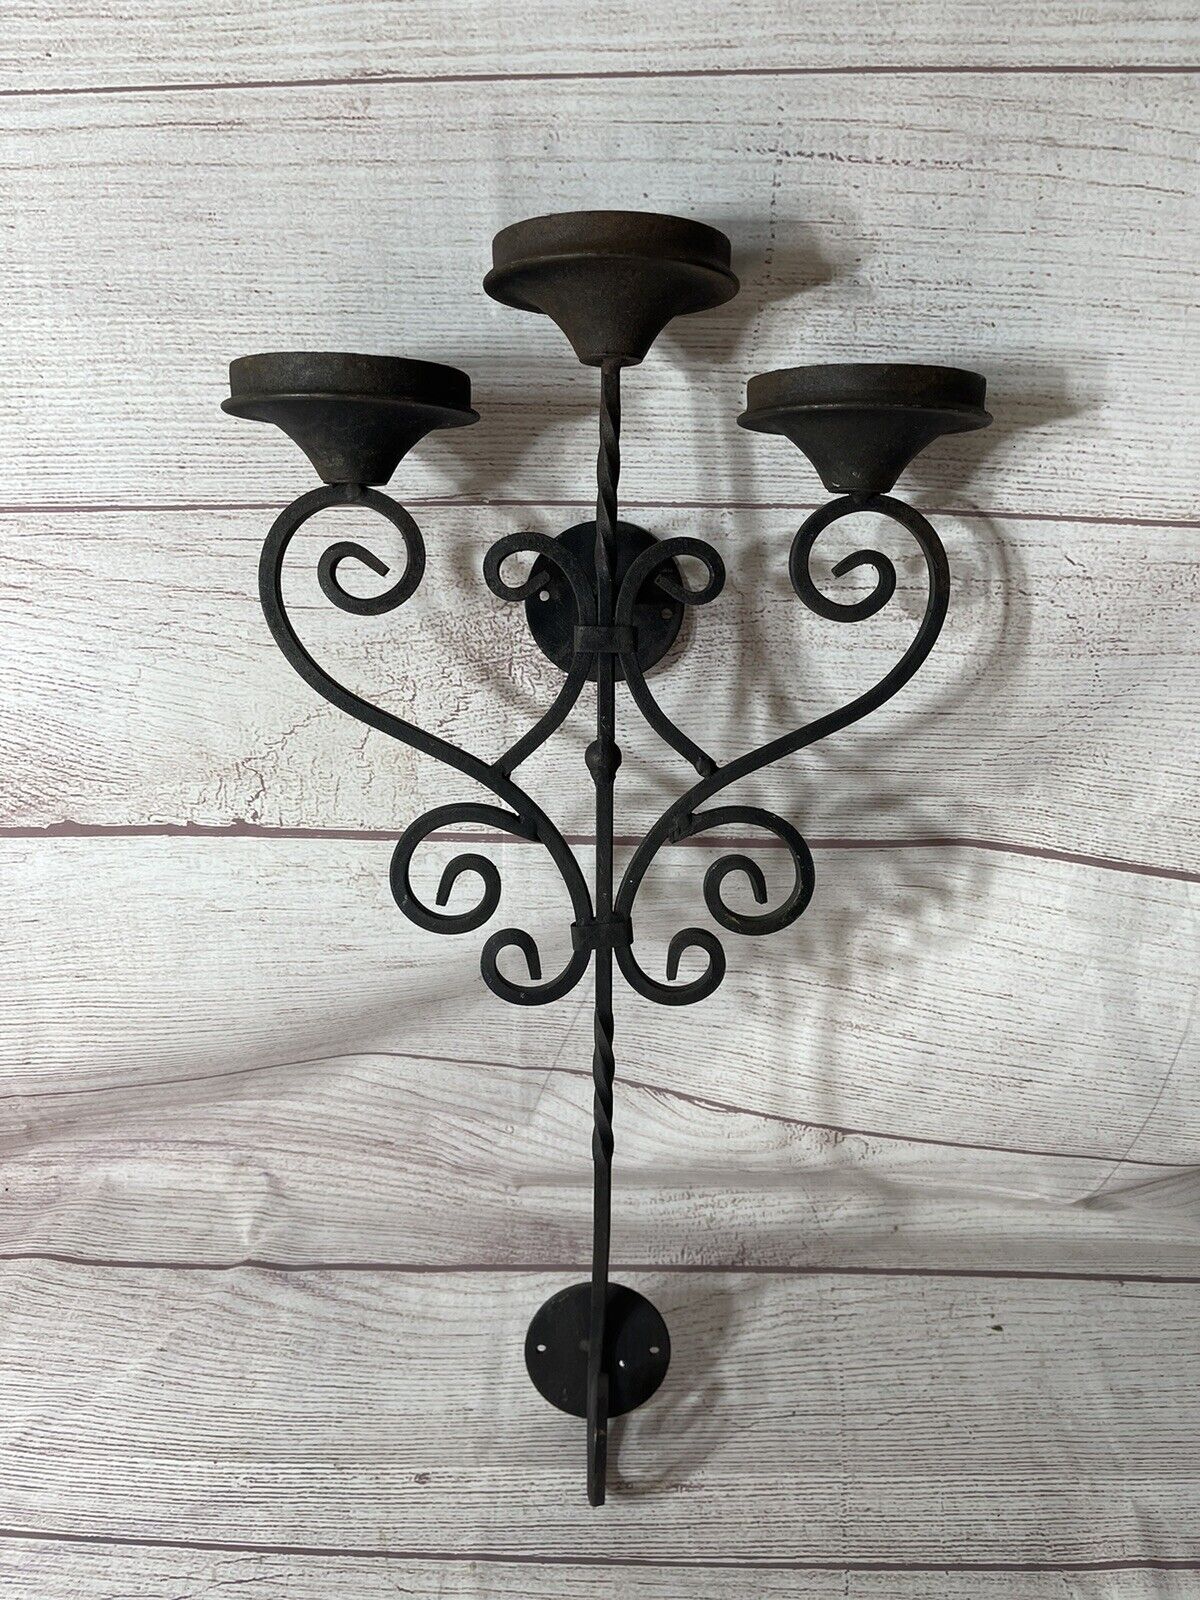 Vintage Cast Iron Ornate Wall Candle Holder Wrought Iron 3 Candle Holder